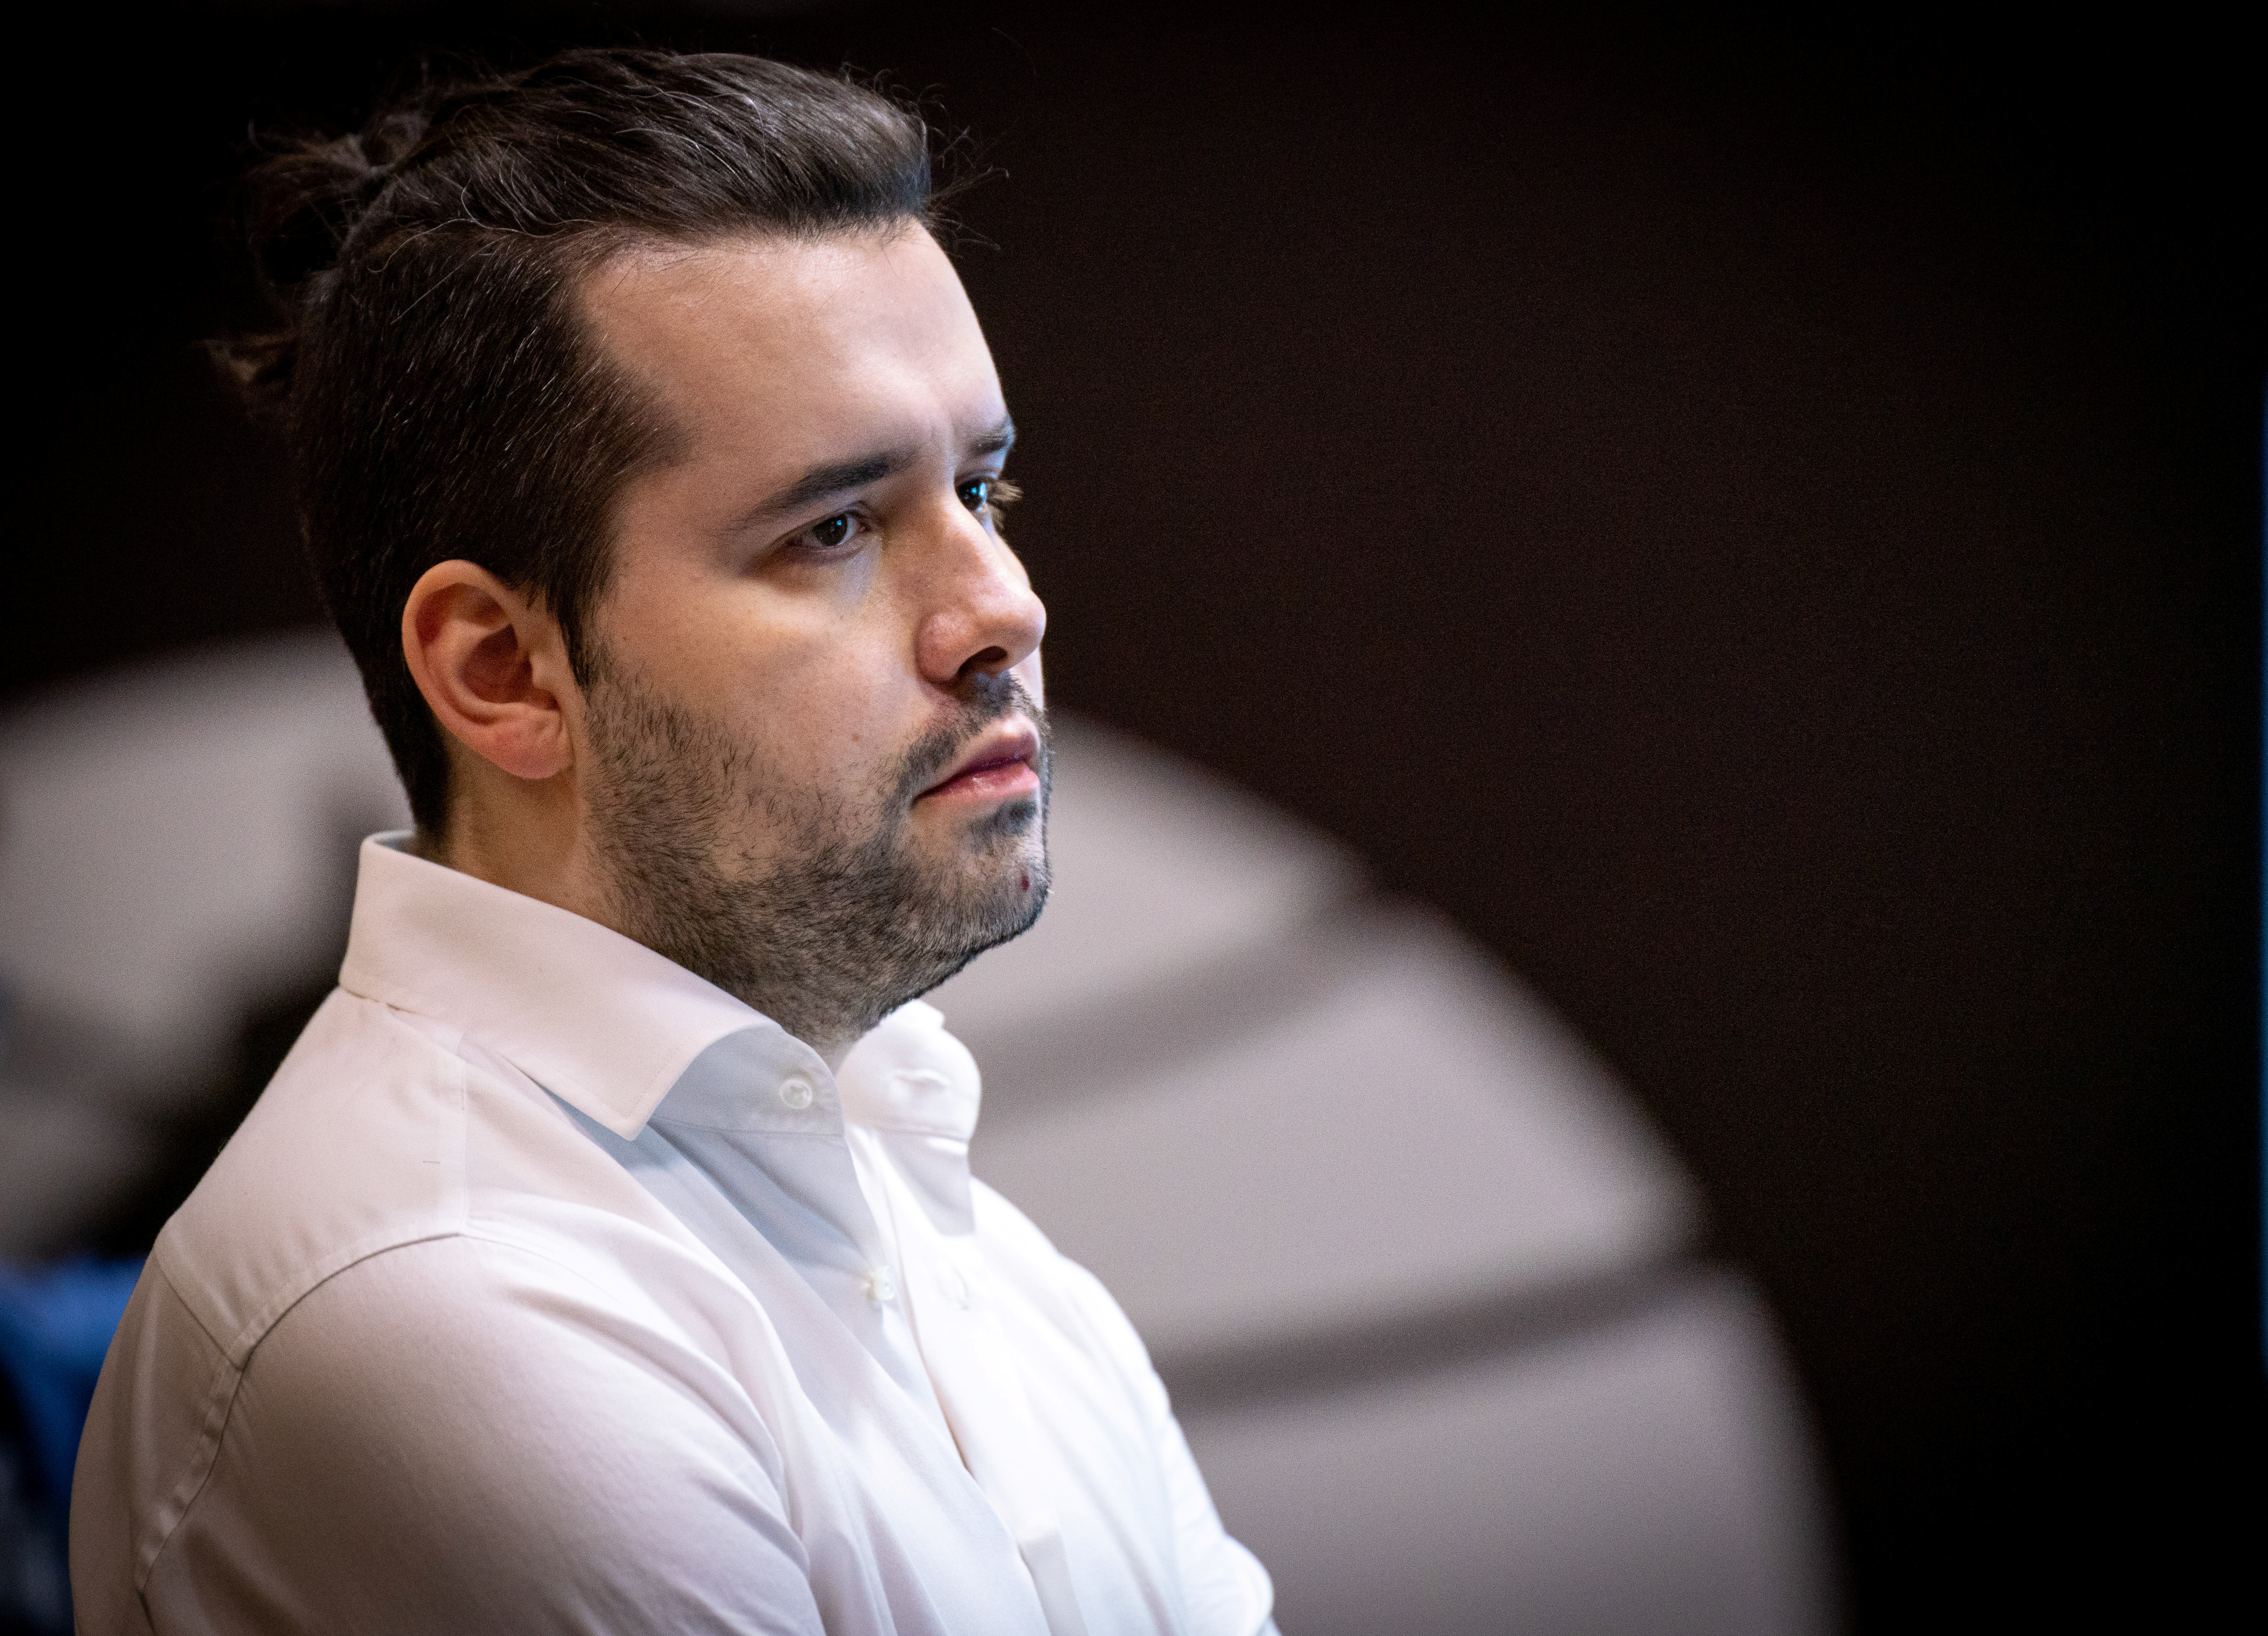 Nepomniachtchi earns one-point lead at FIDE Candidates Tournament